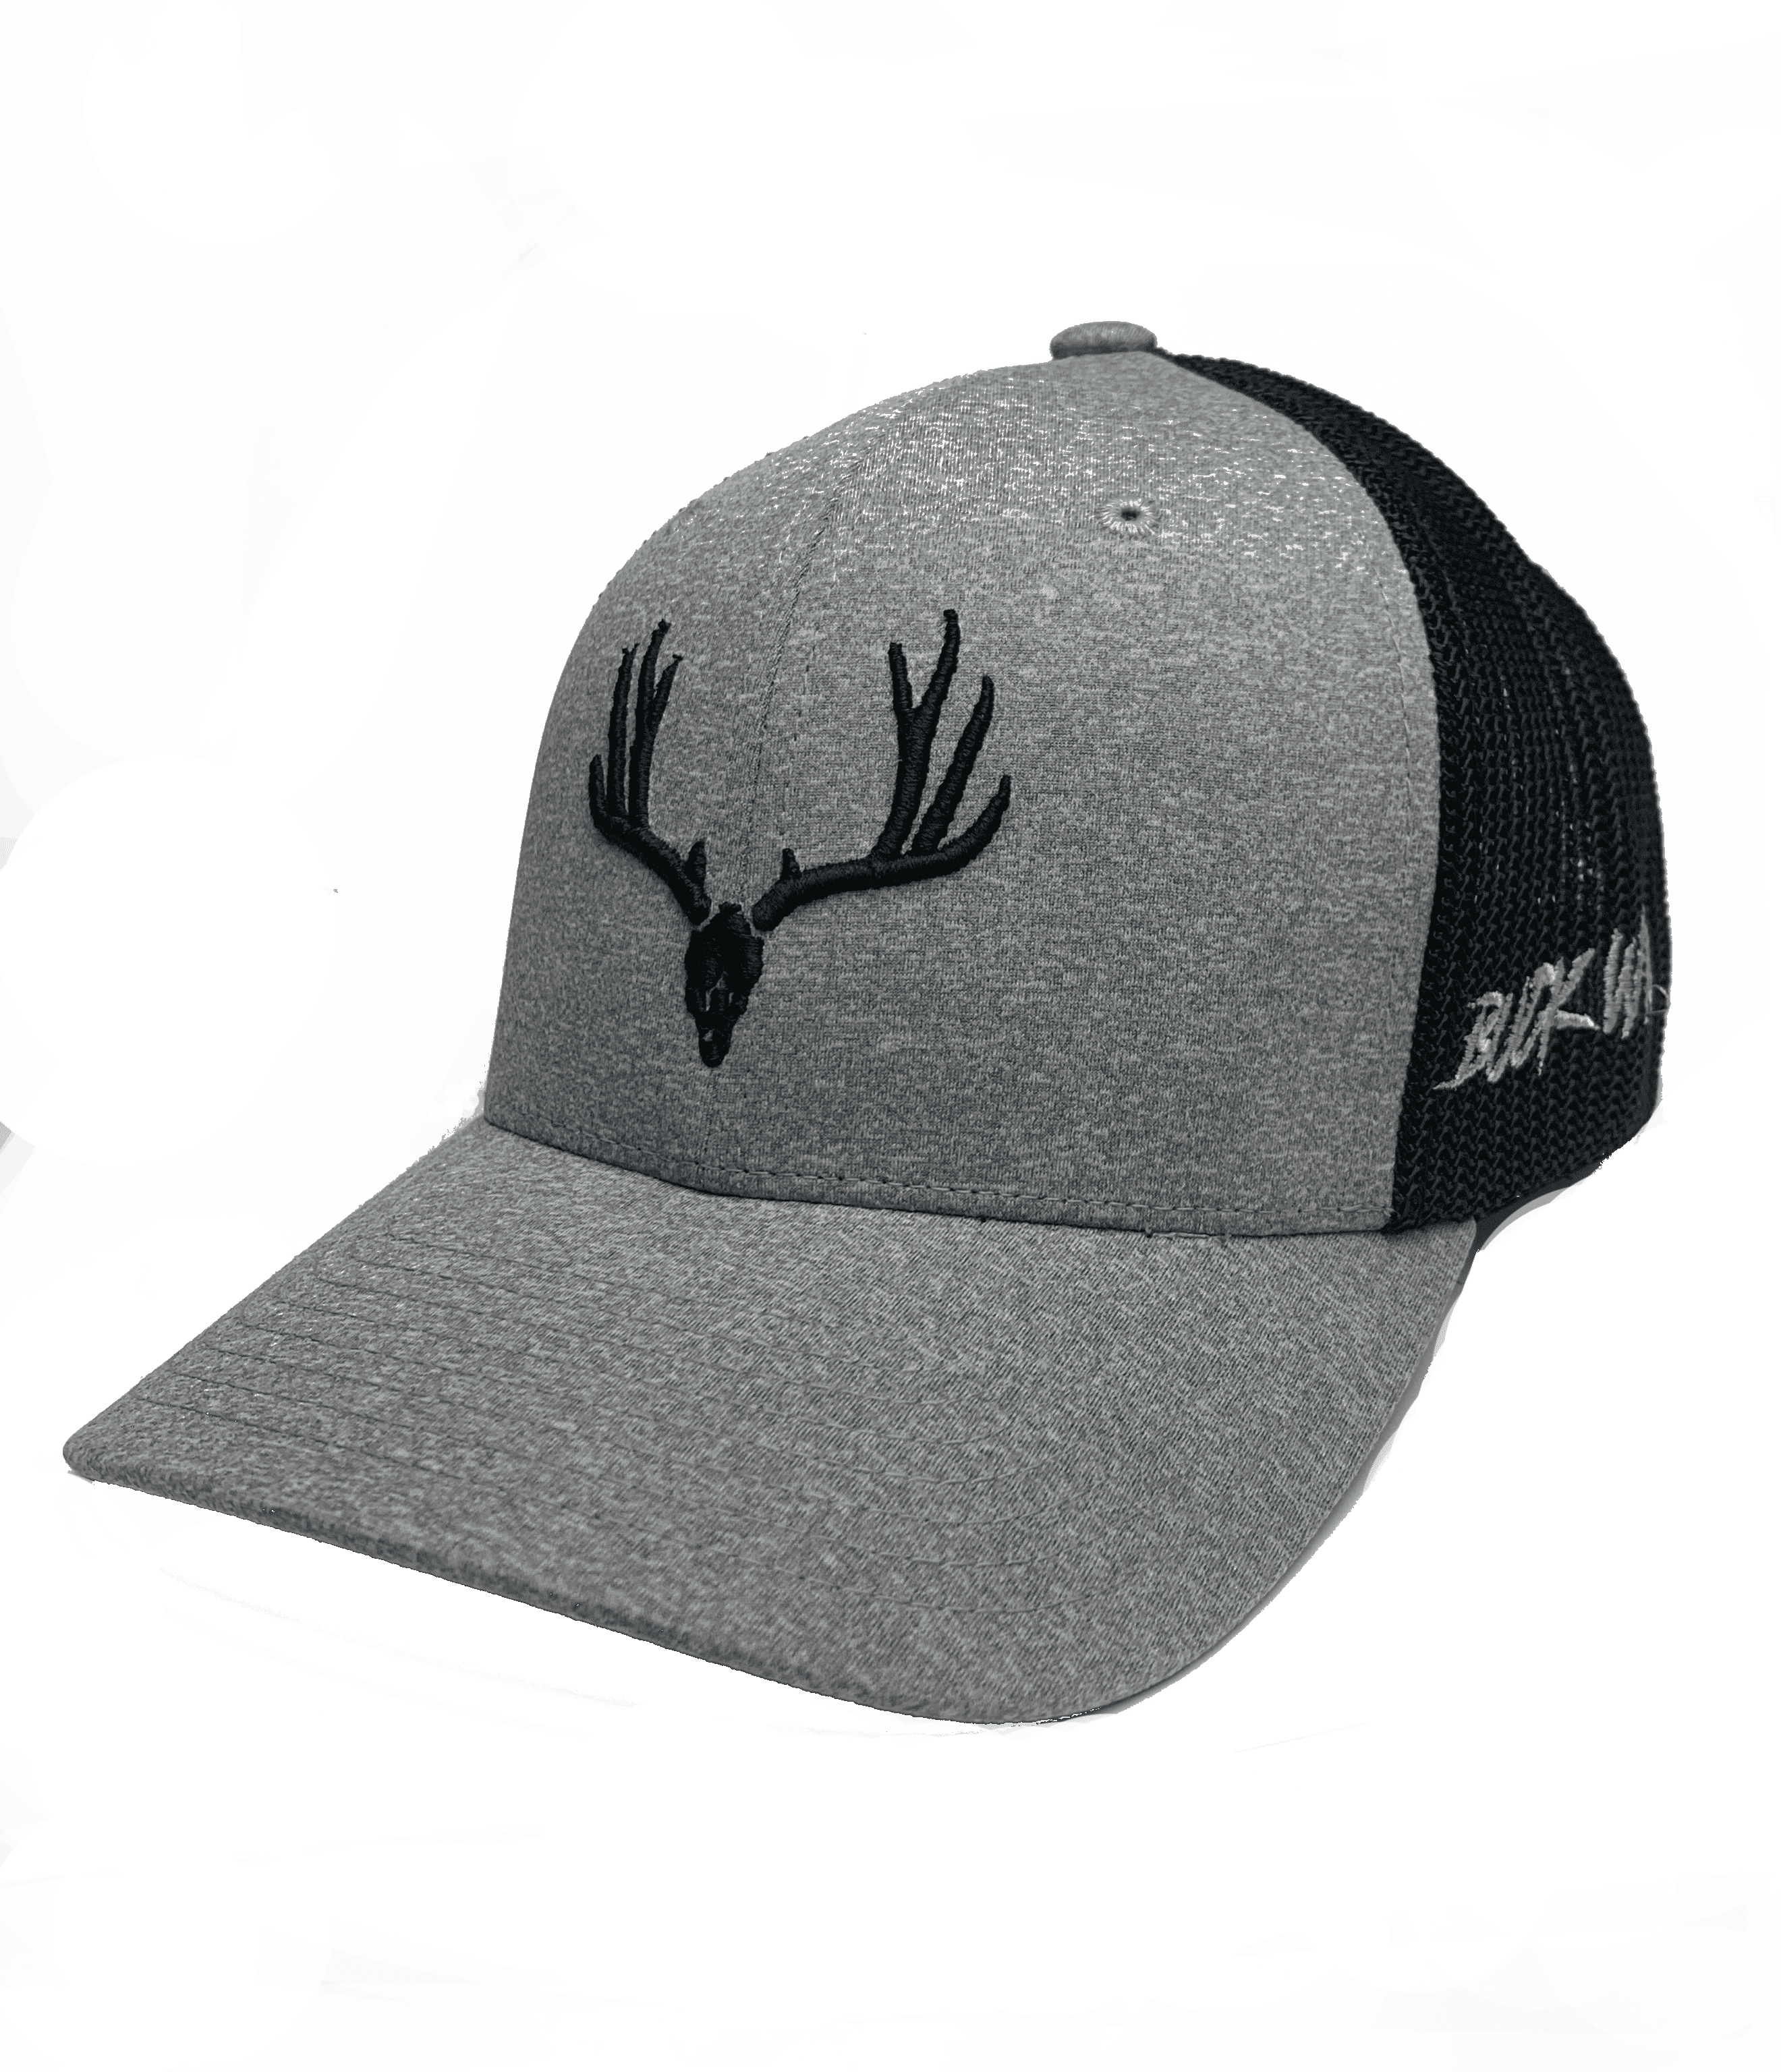 Red With Logo Hat Buck Fit Hat Gray Charcoal Black Wild Flex OSFA or